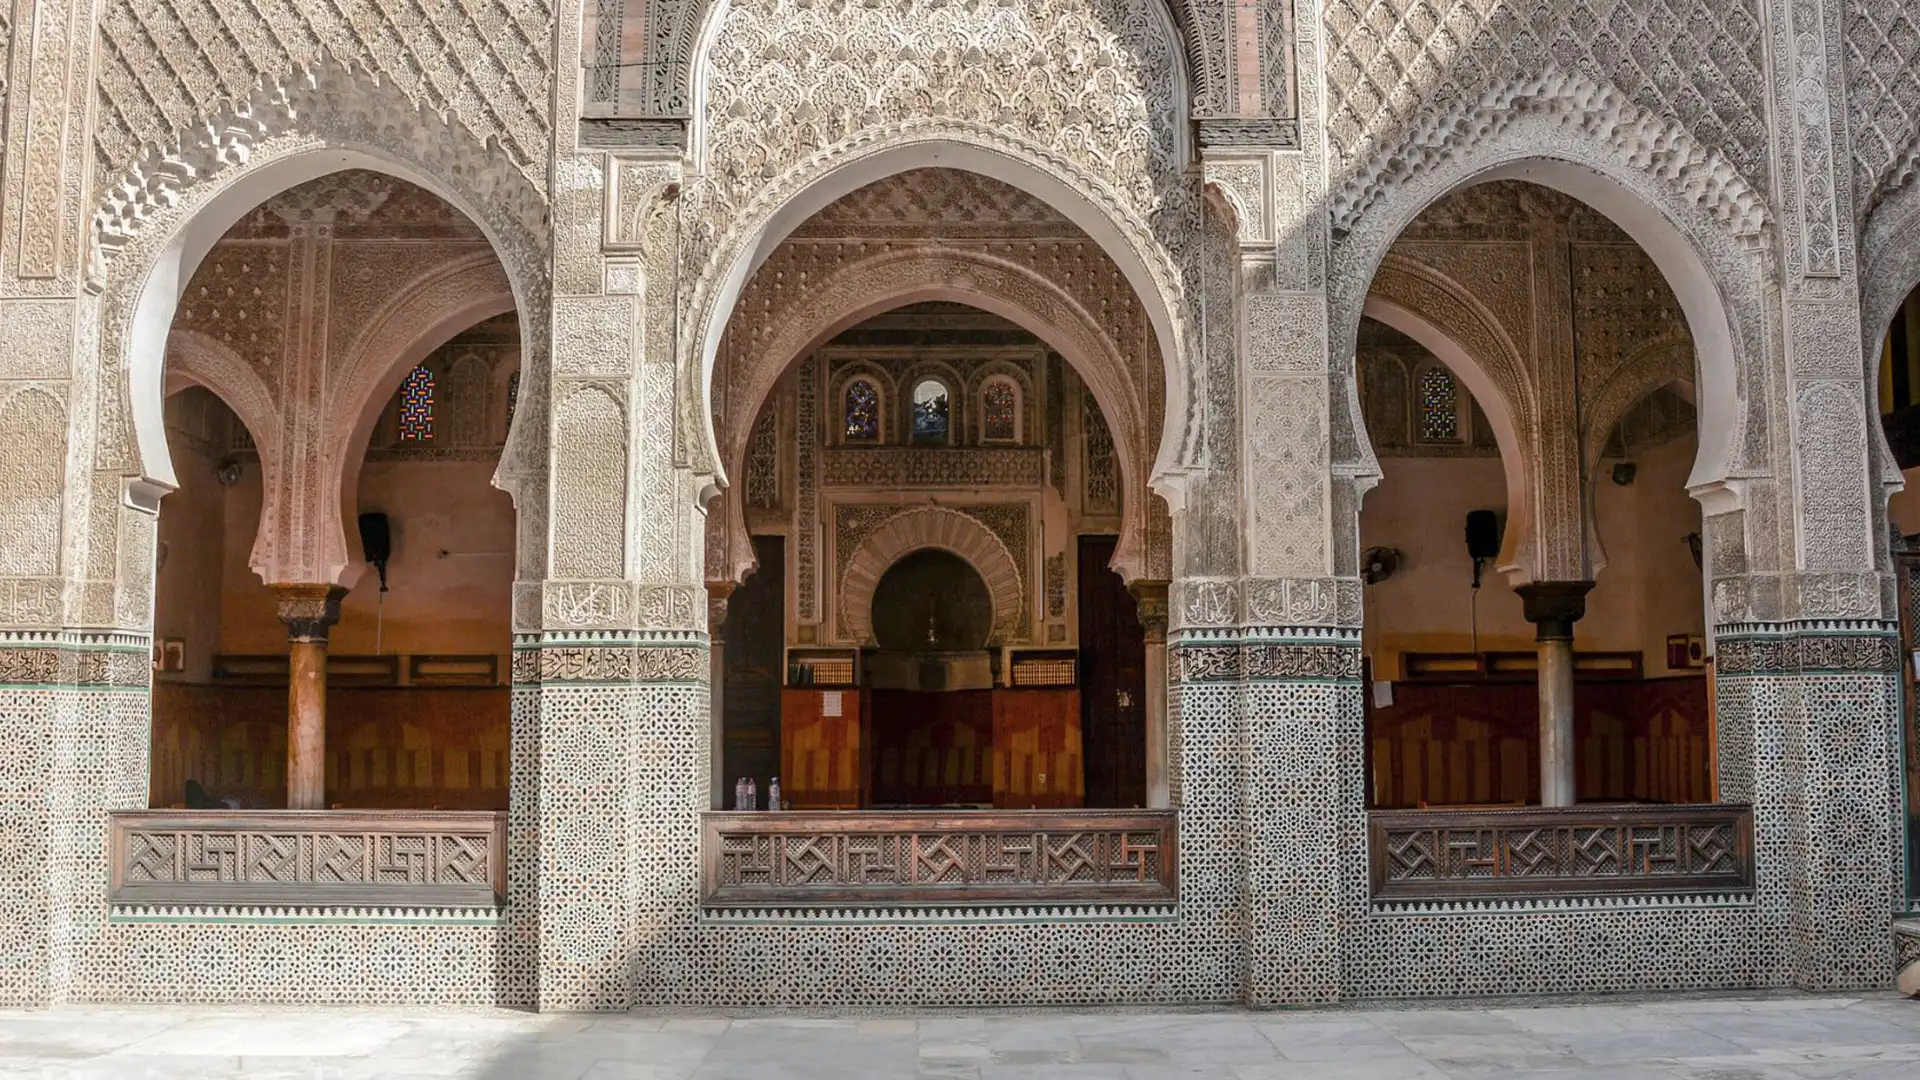 Visiting the Bou Inania Madrasa in Fes